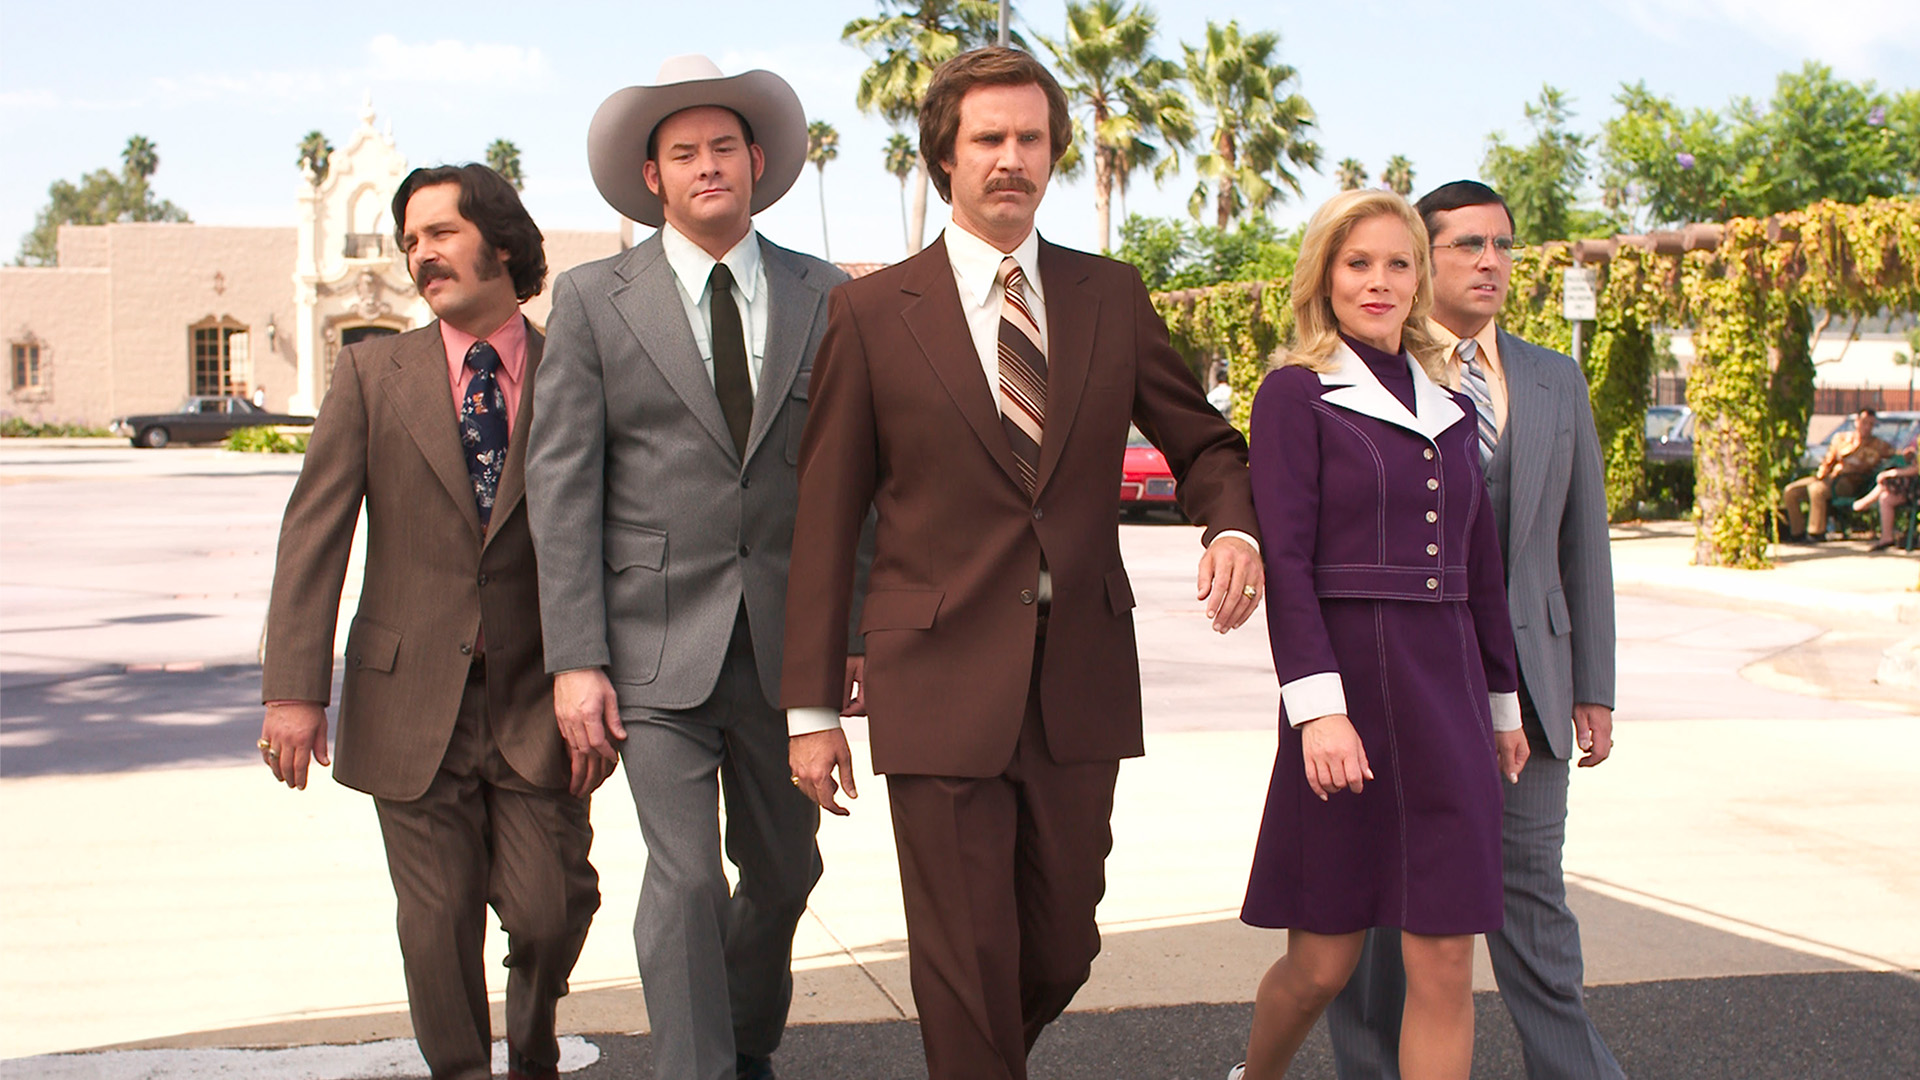 12 Famous People You Forgot Appeared in 'Anchorman'